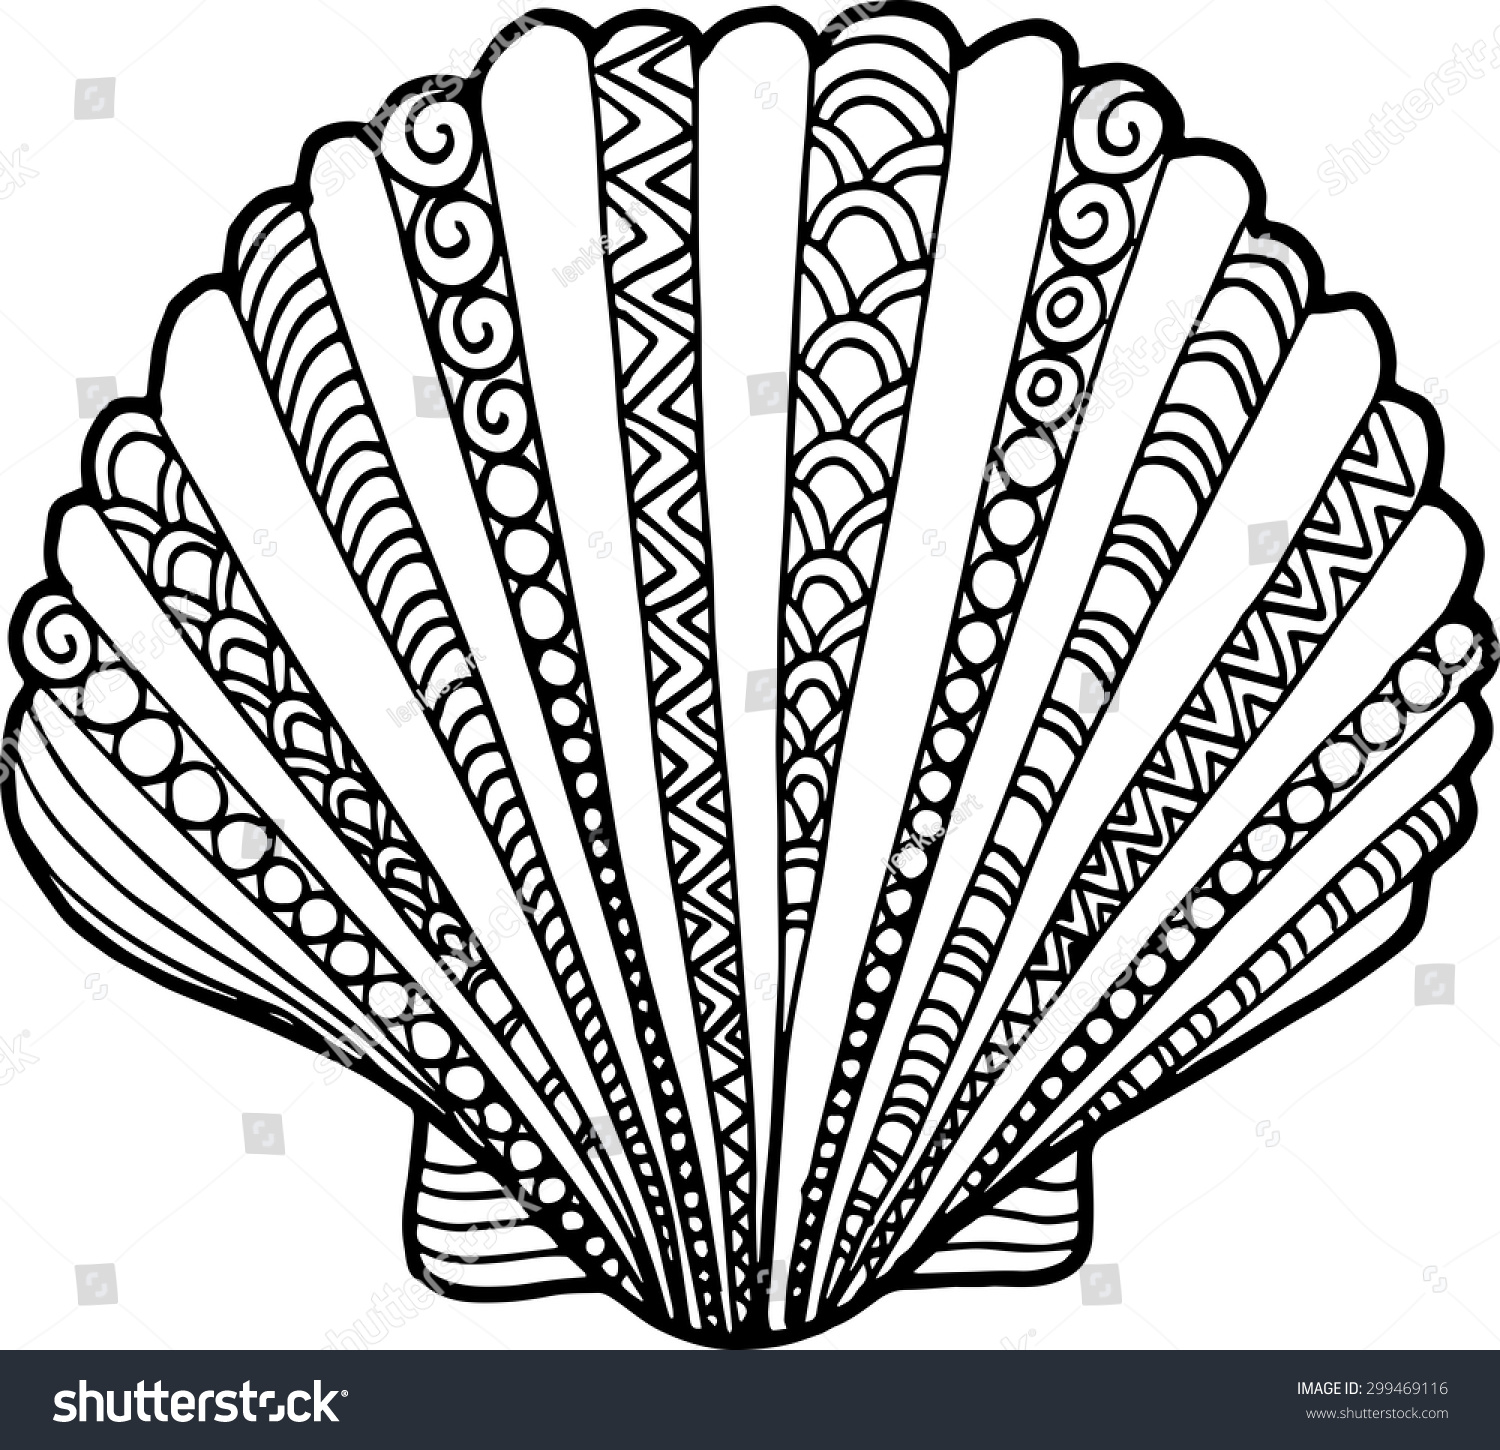 Hand Drawn Outline Shell Illustration. Seashell Drawing Decorated With ...